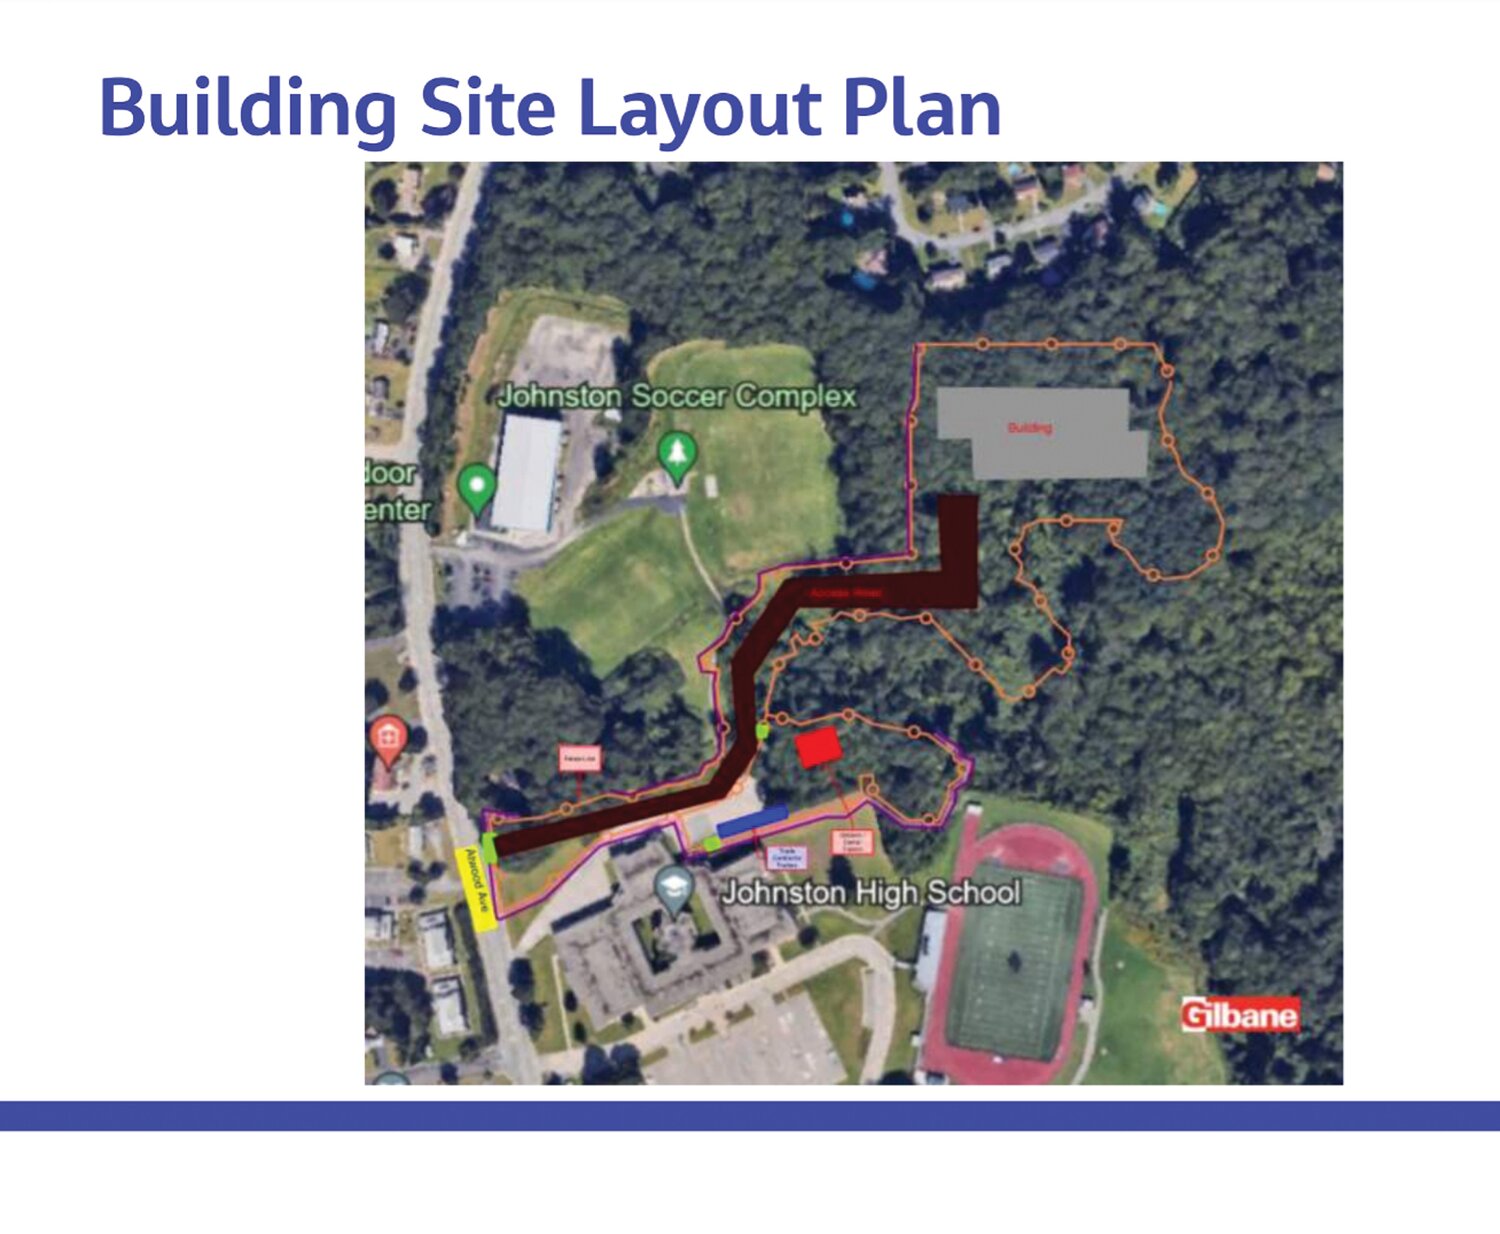 THE LOGISTICS: The Johnston School Committee met last week to approve preliminary contracts for work to begin at the new elementary school. (Courtesy images)